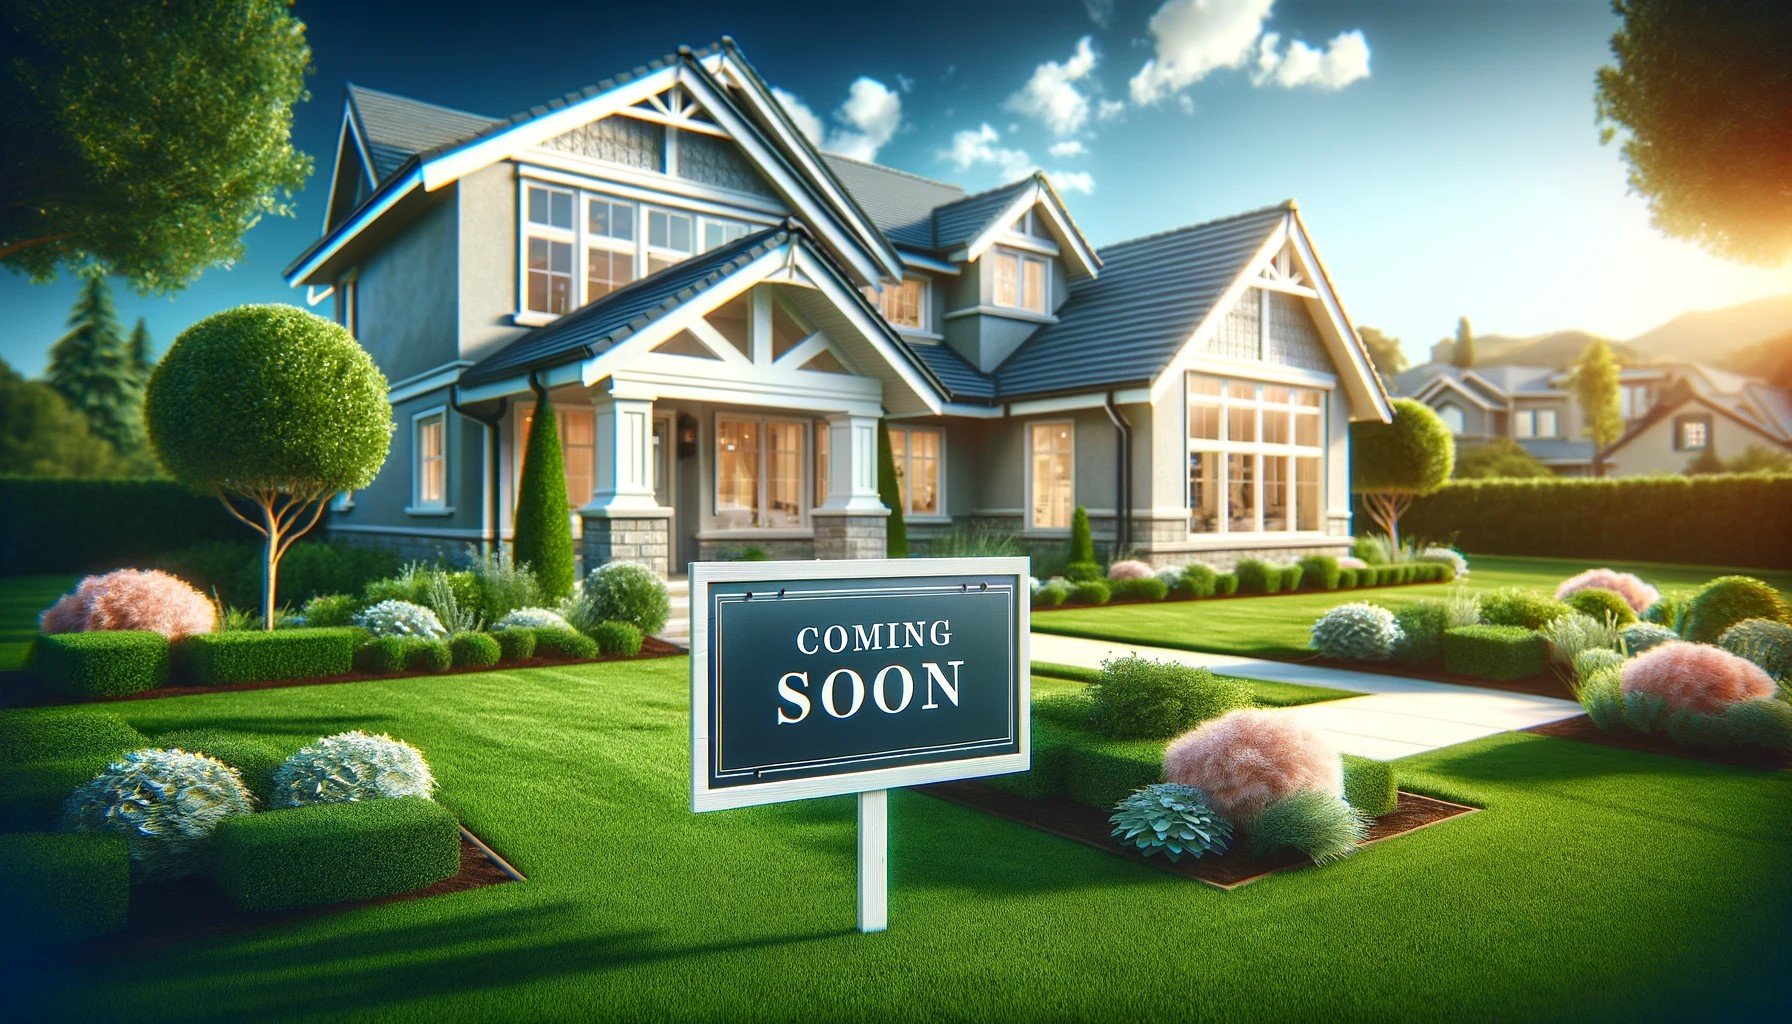 preparing home for sale - coming soon